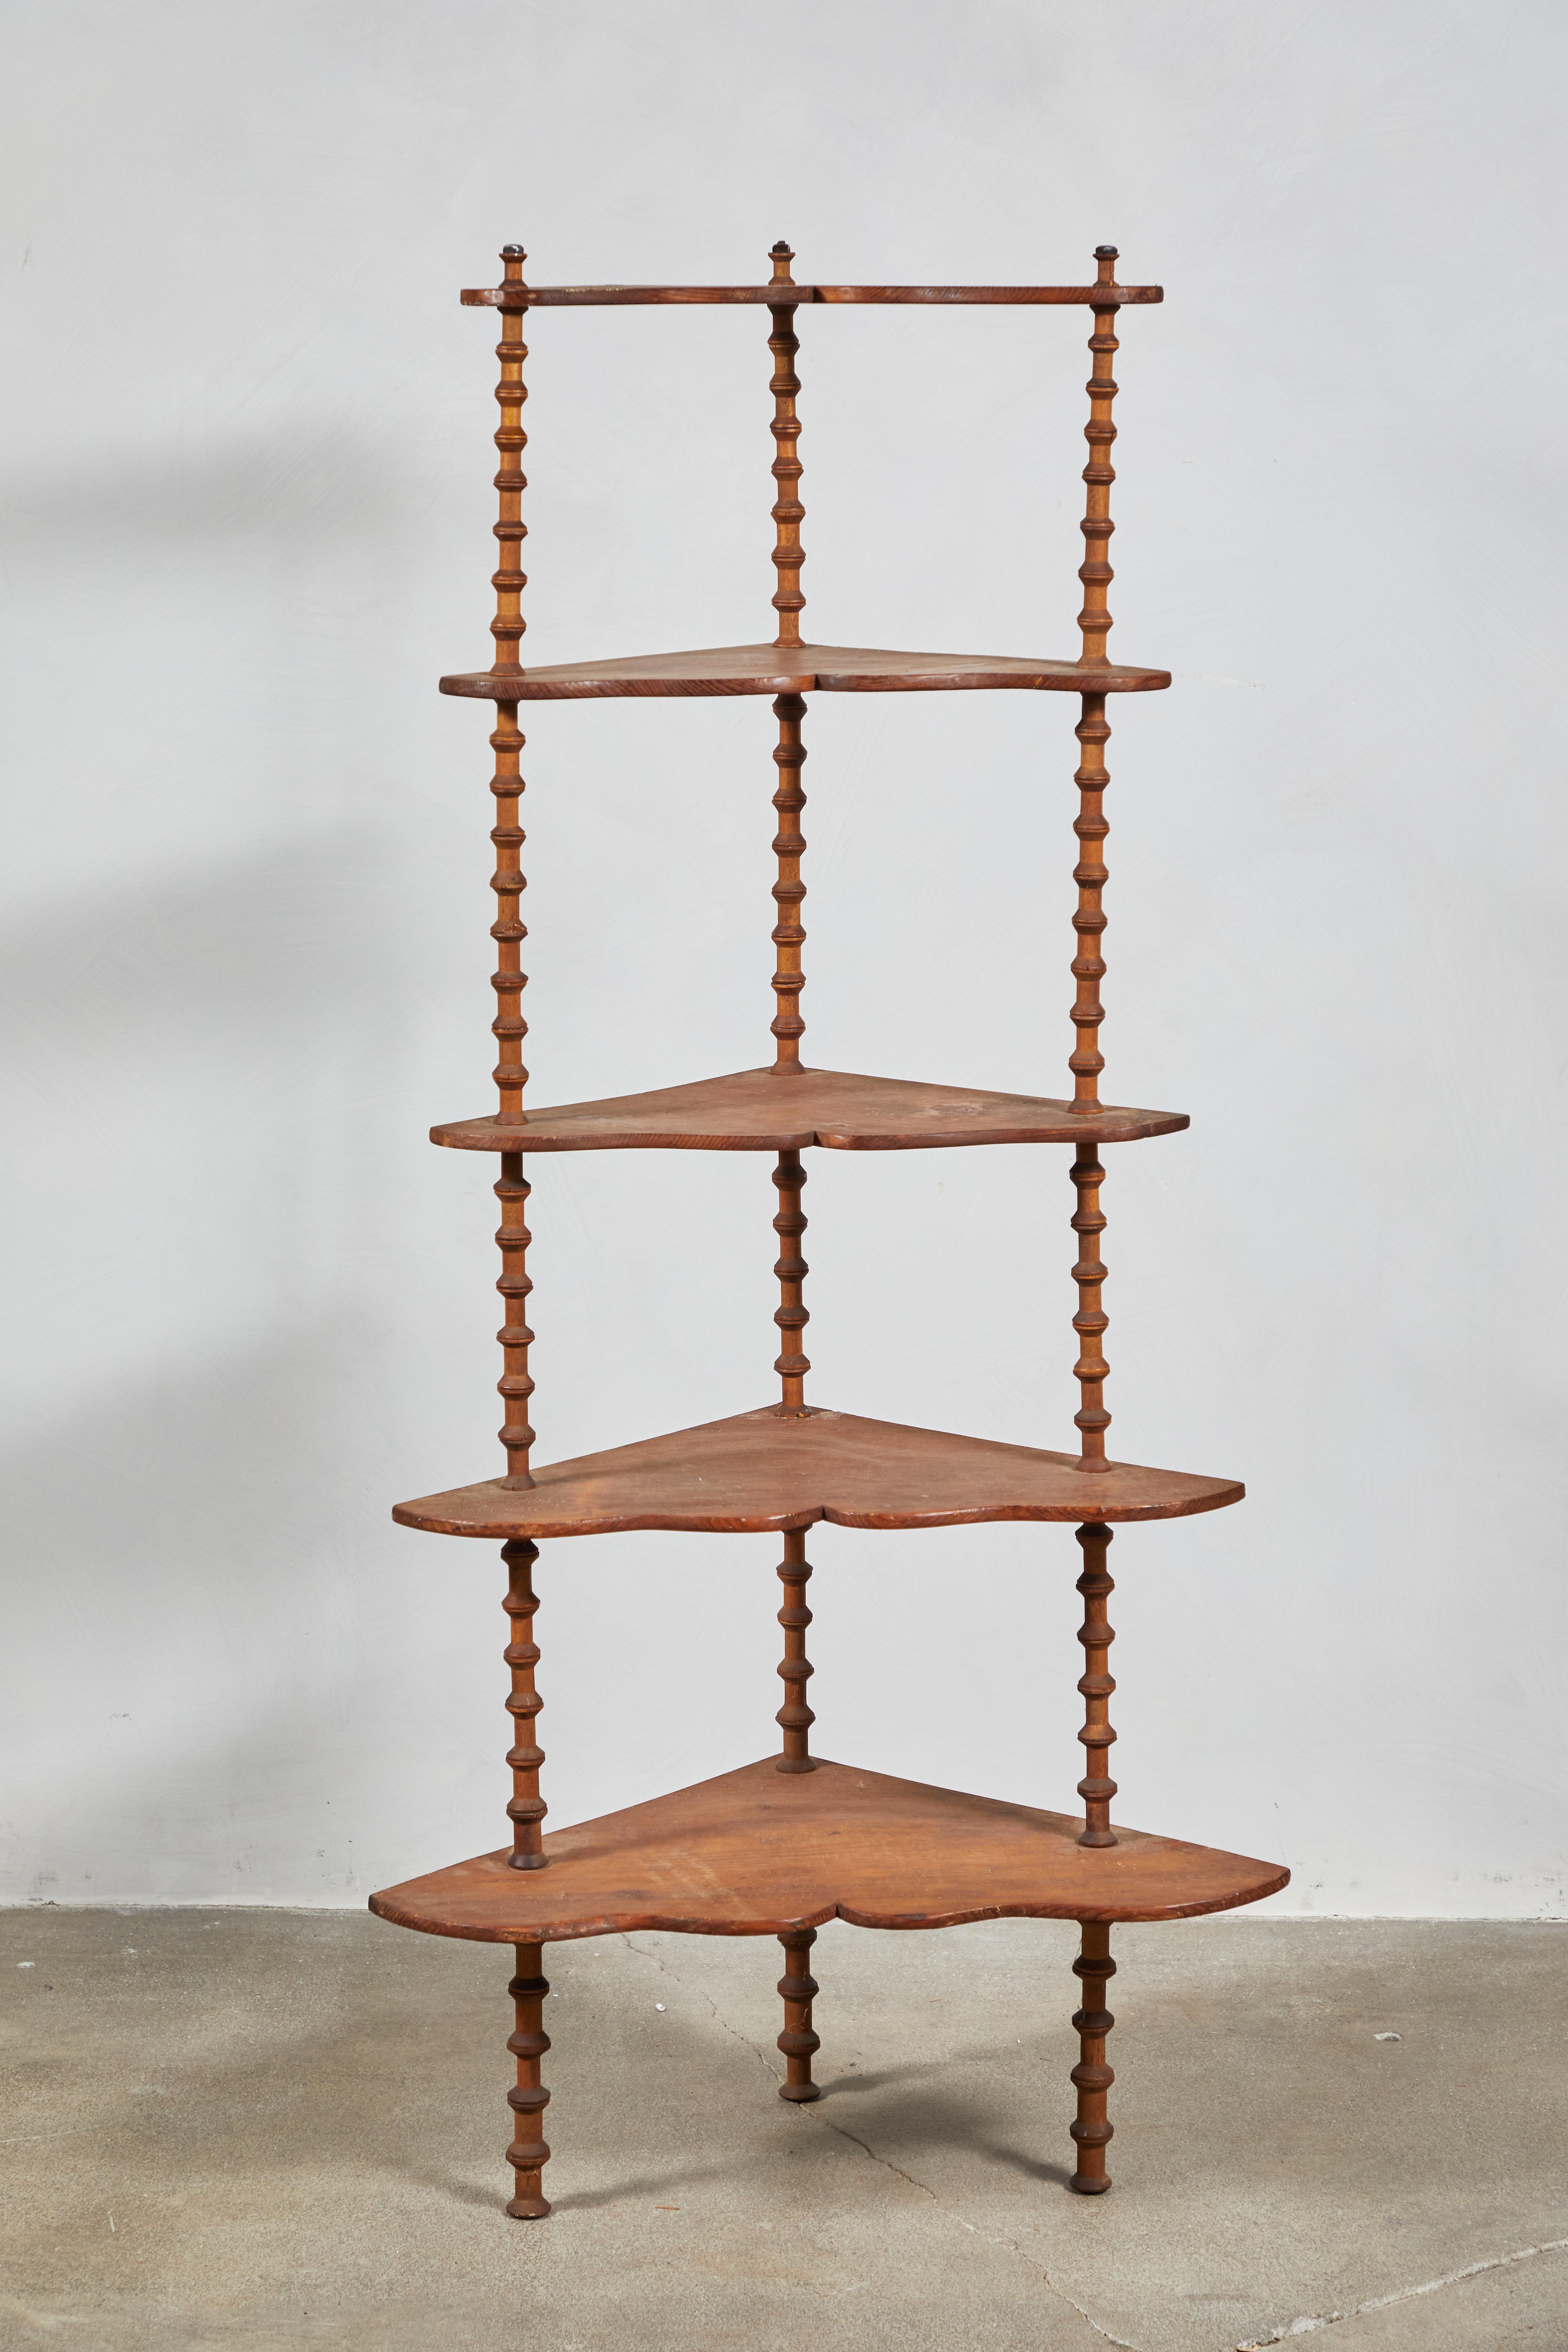 Early American wooden corner spool shelf with five shelves that get smaller, from top to bottom.